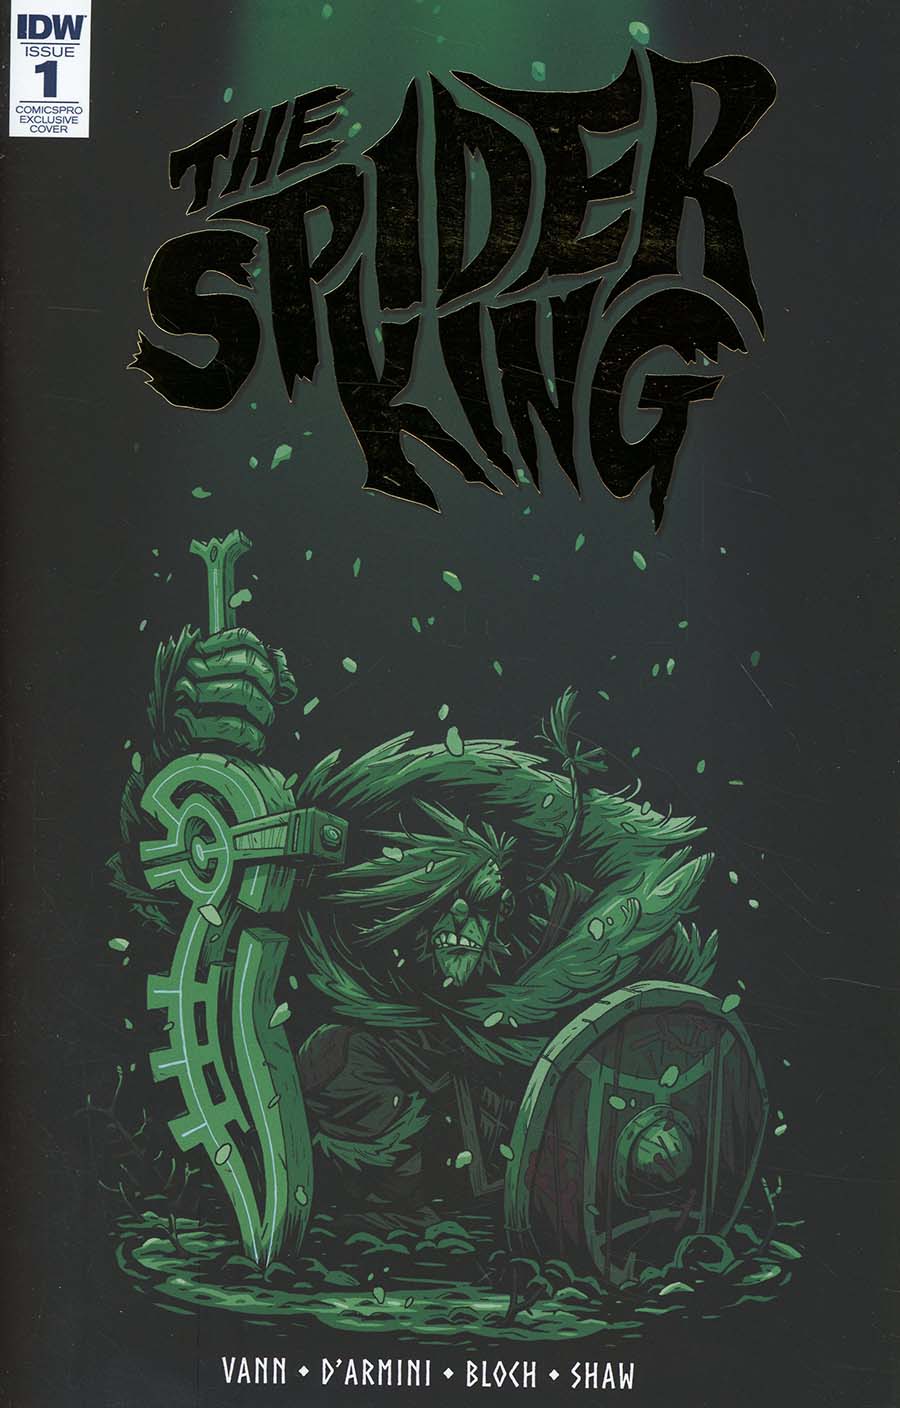 Spider King #1 Cover D ComicsPro Exclusive Variant Cover